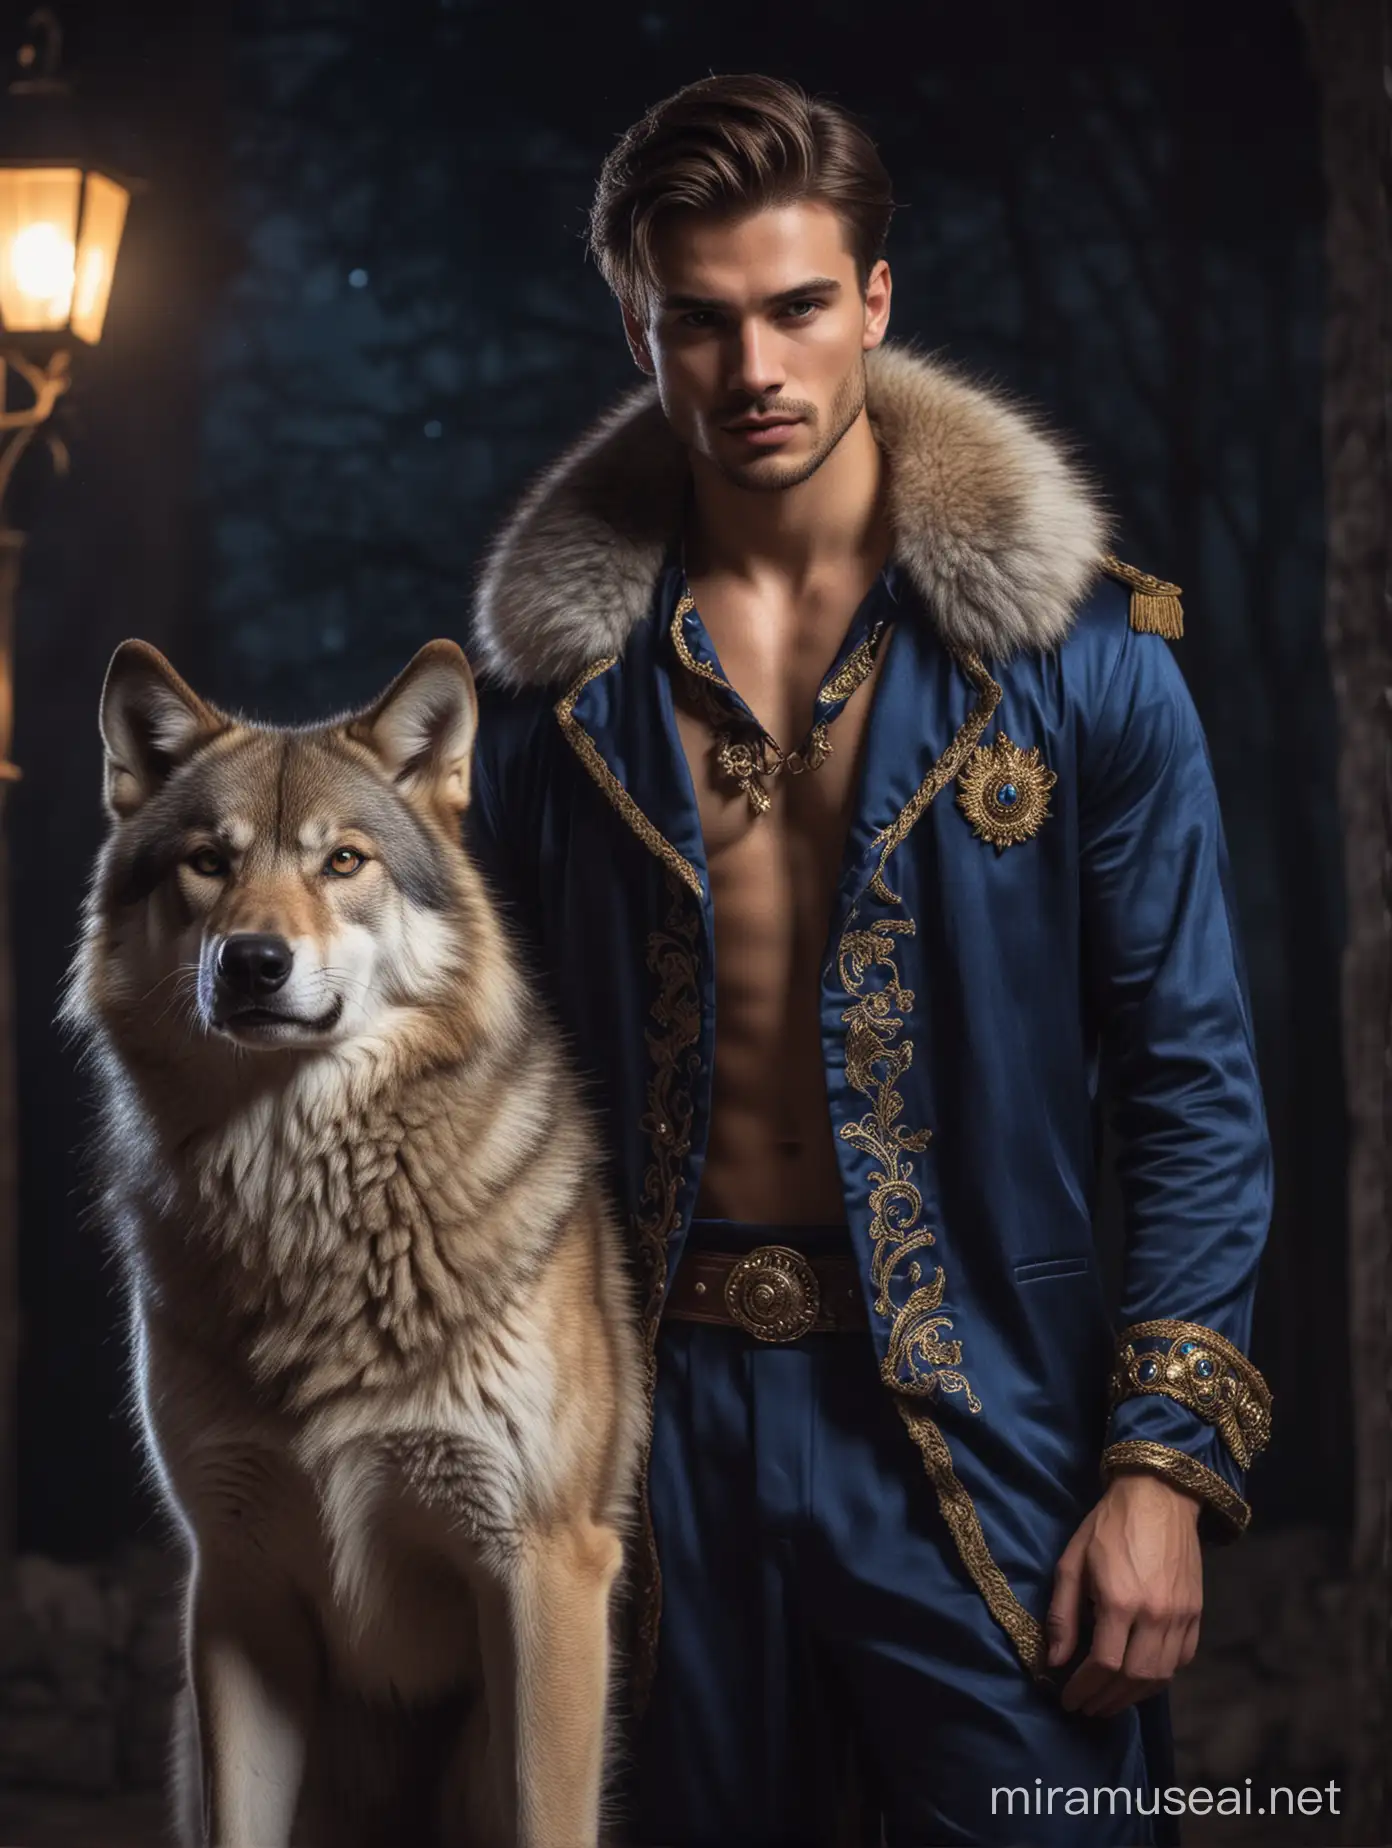 Handsome young man in hot sexy Royal apparel, standing beside a wolf at night. 